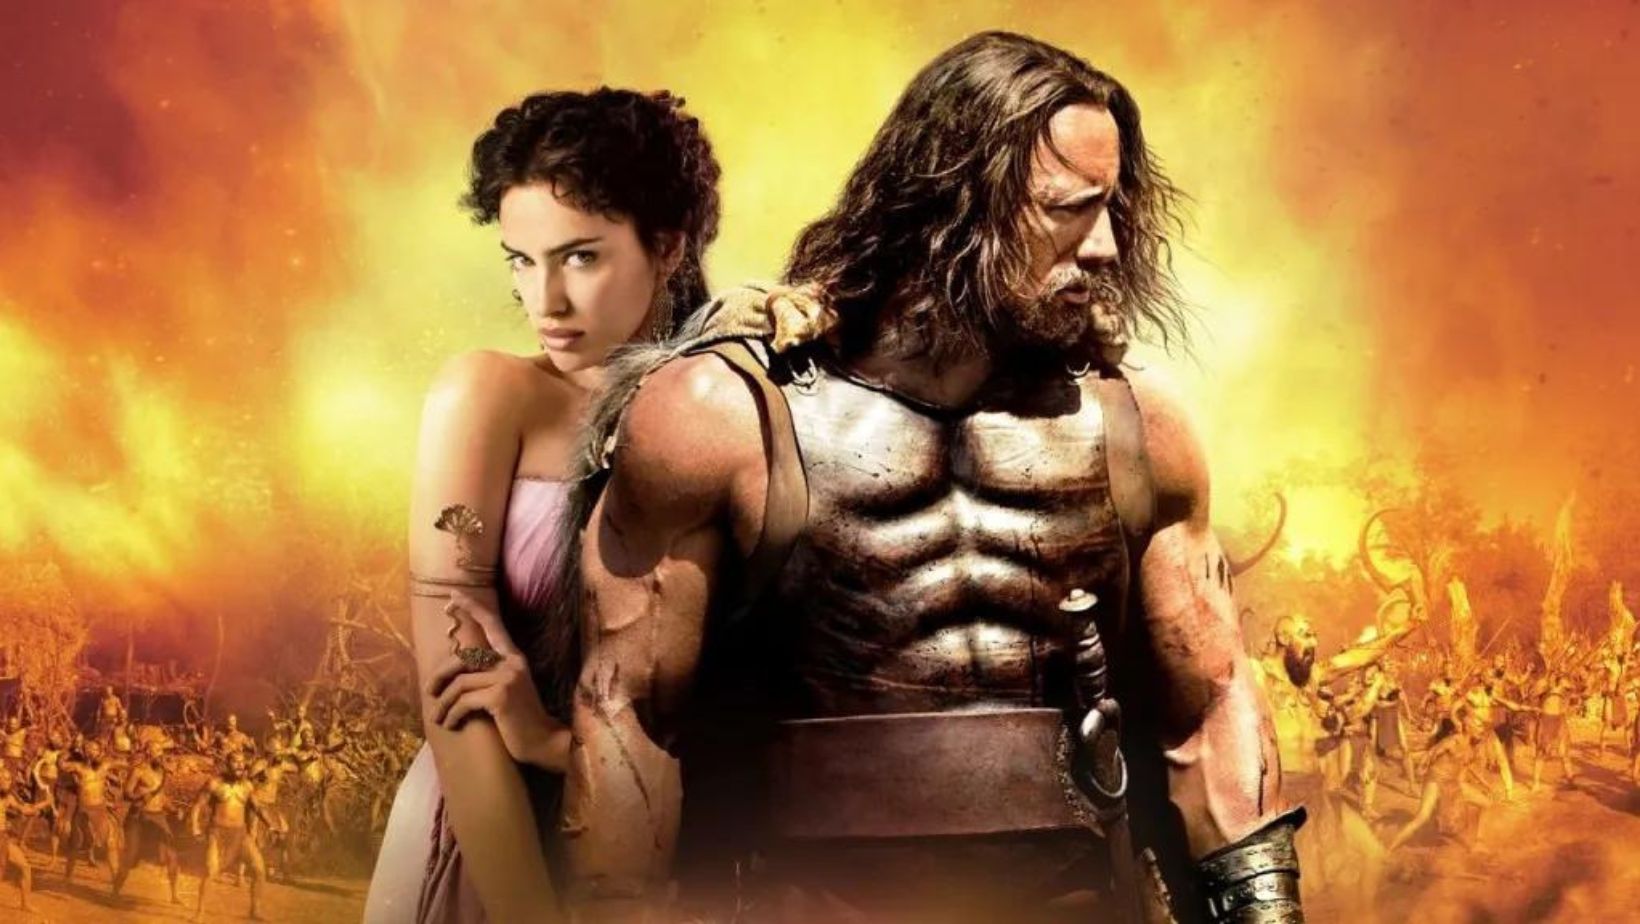 Movies Based on Ancient Myths and Legends